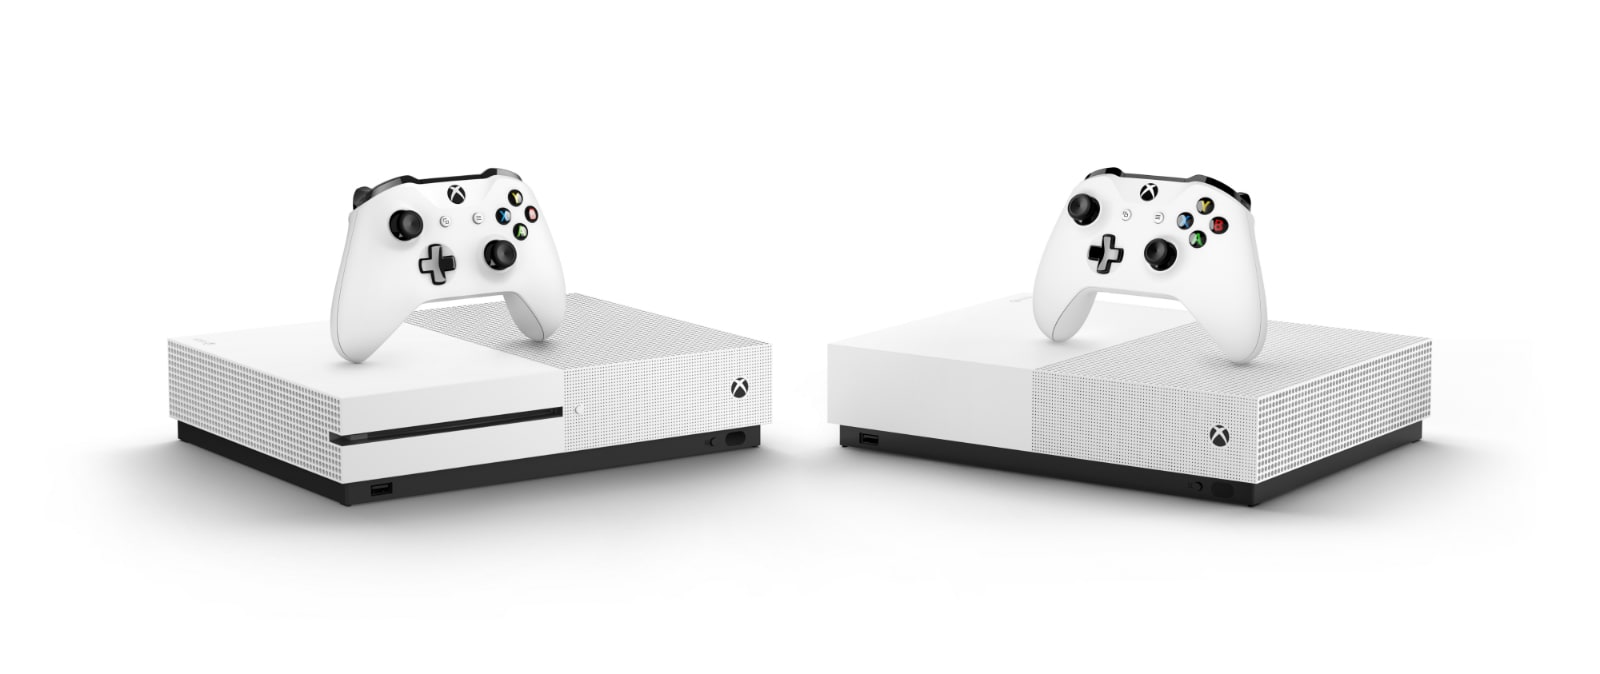 The Disc Free Xbox One S Hits Stores On May 7th For 250 Engadget